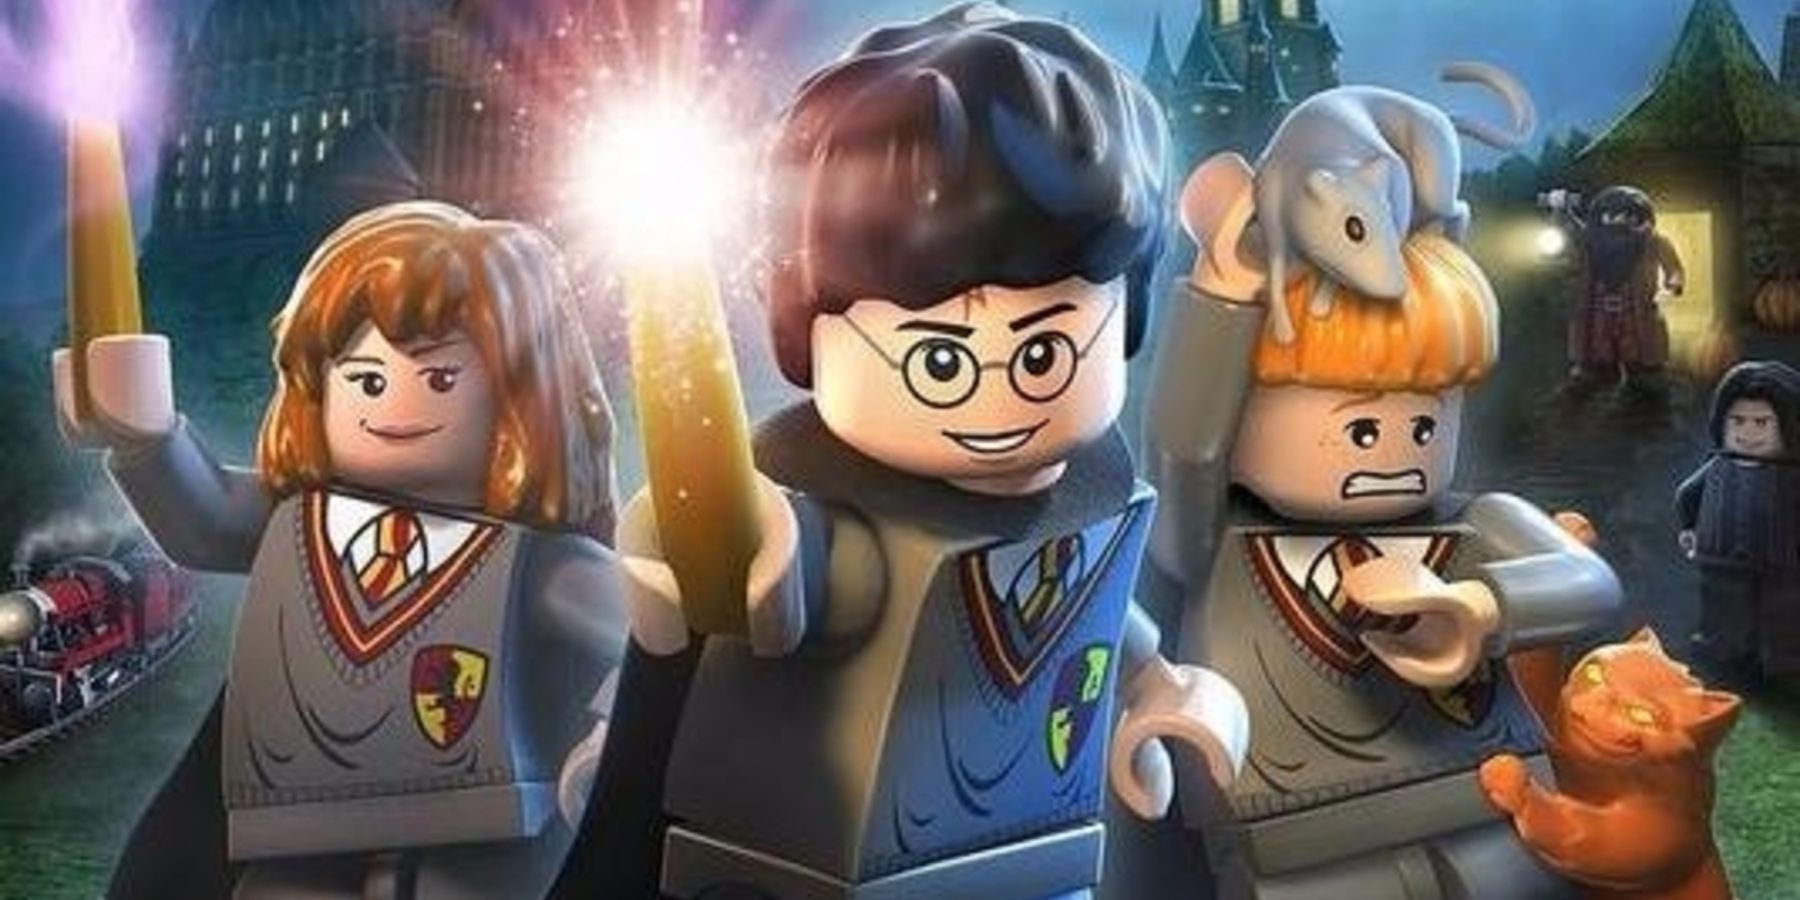 Harry, Hermione, and Ron stand in front of Hogwarts castle casting spells